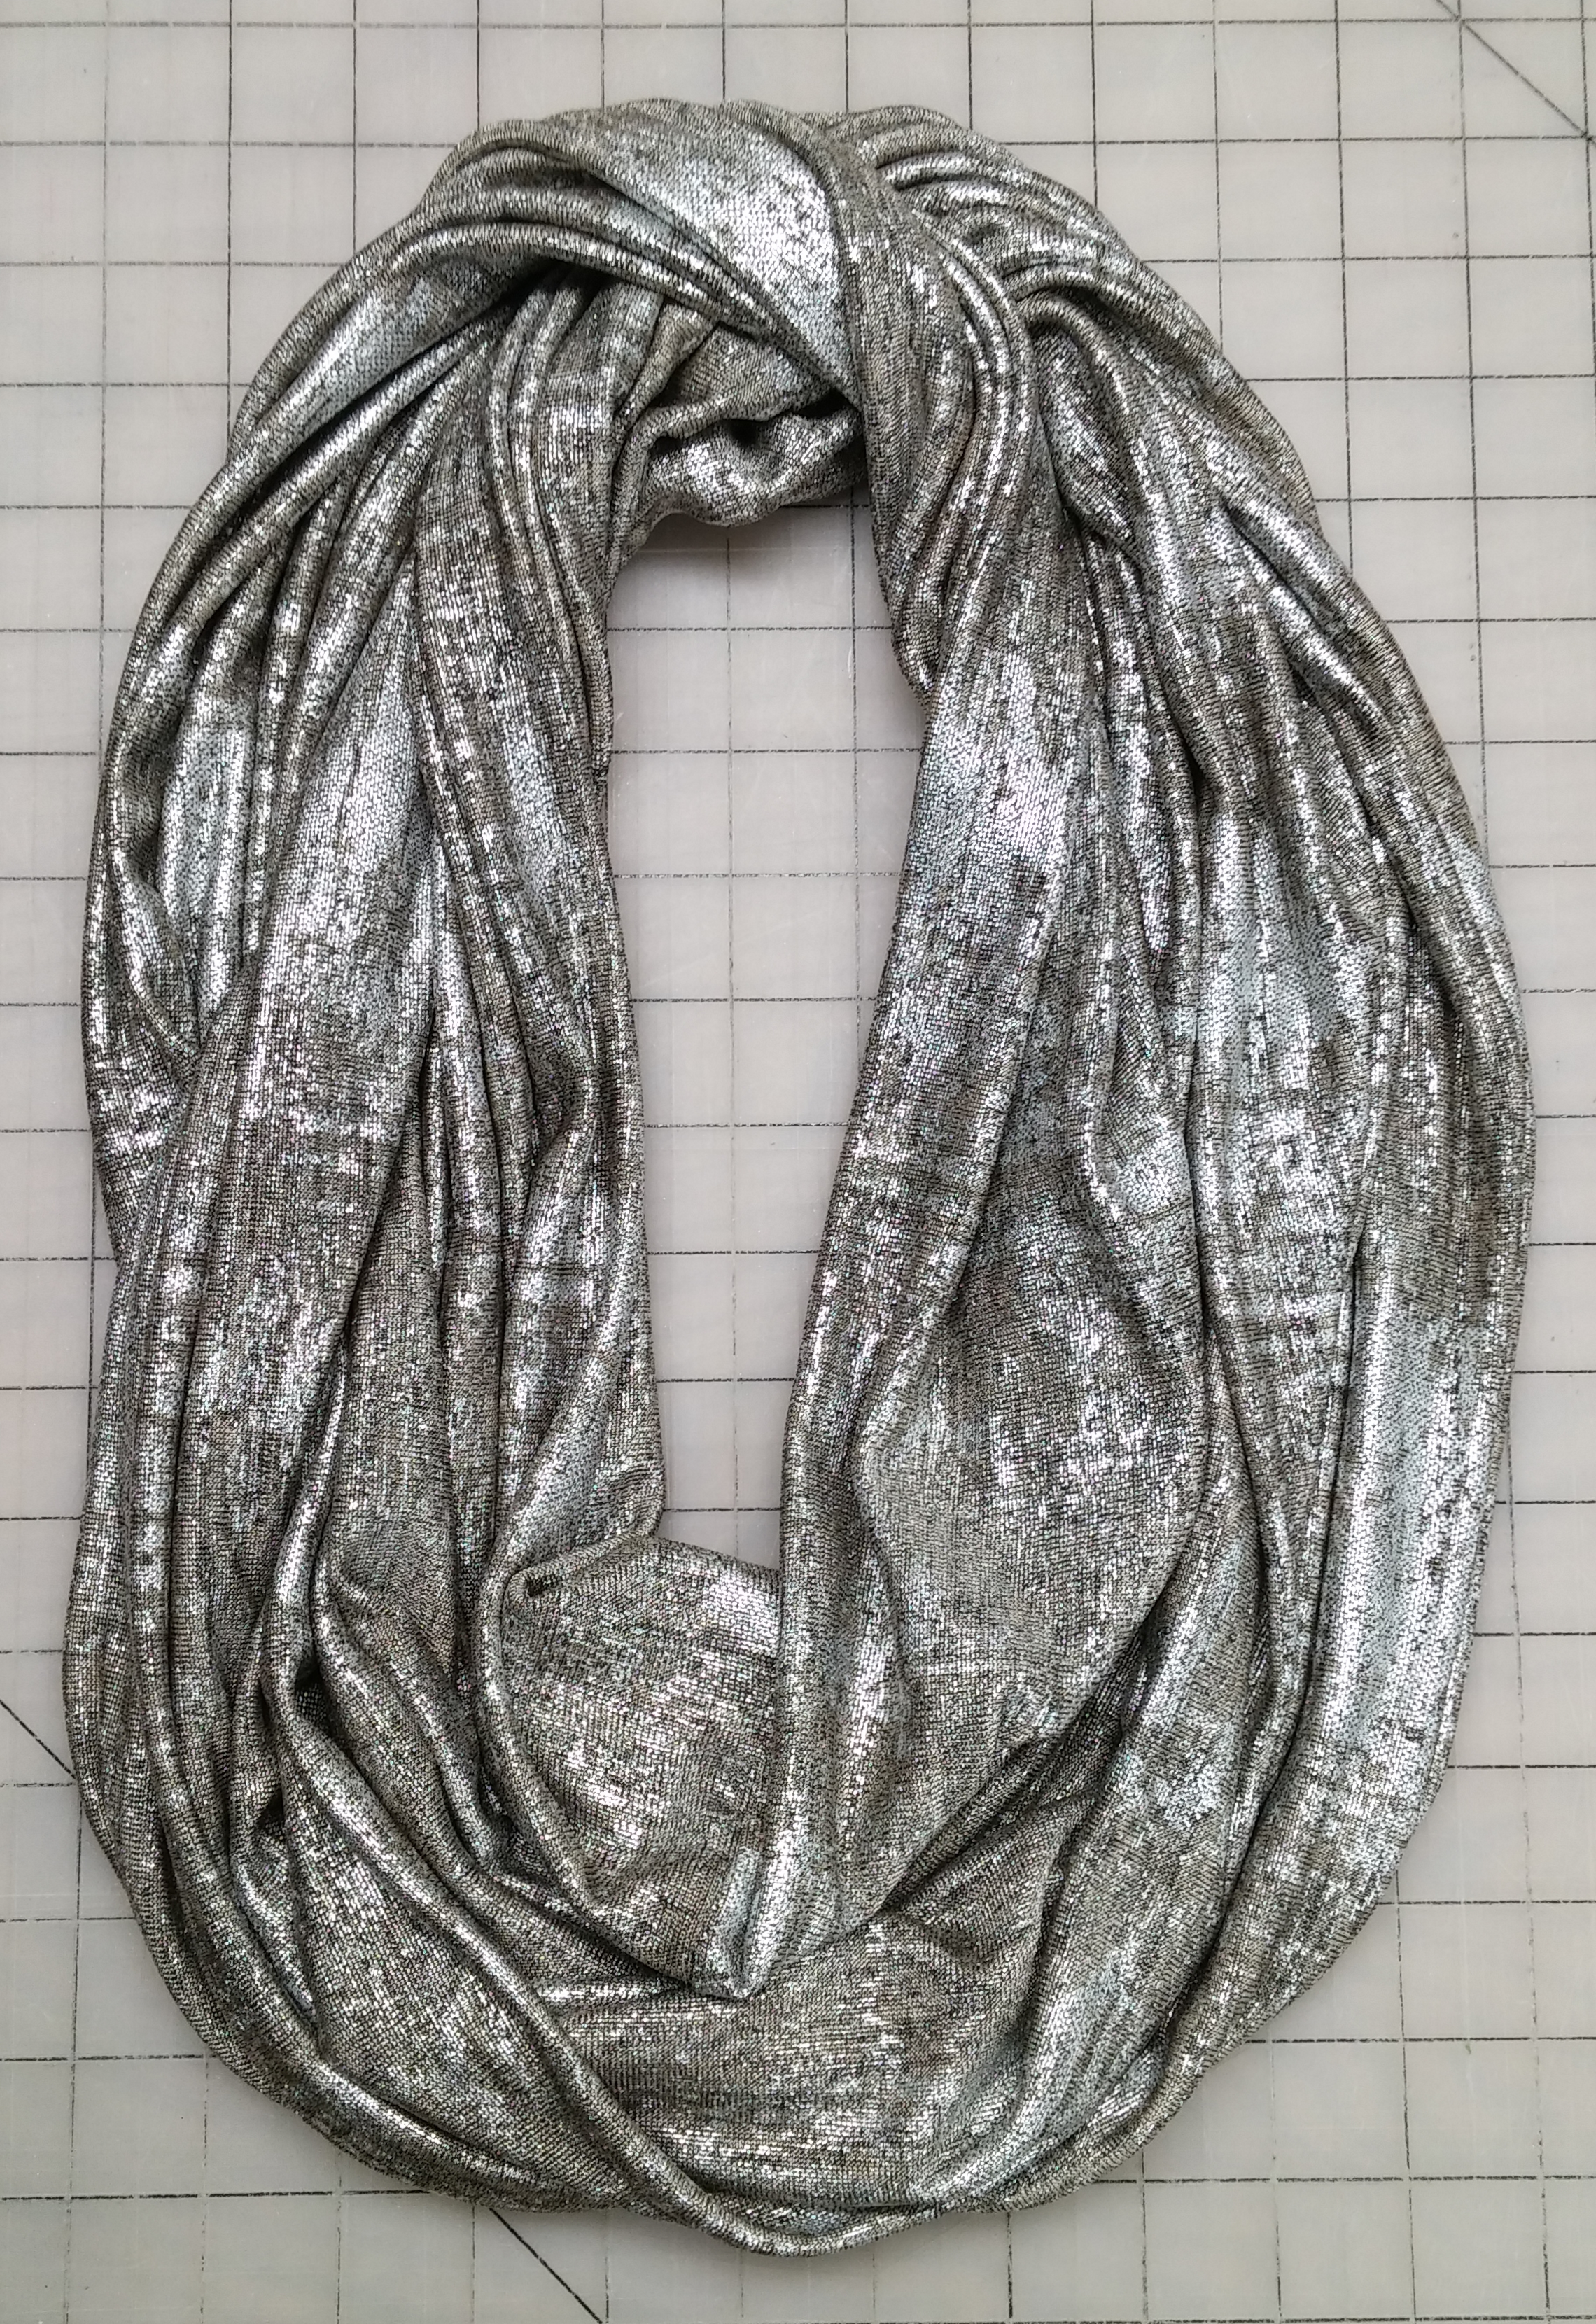 Infinity Scarves – Sewn with a Serger or a Sewing Machine